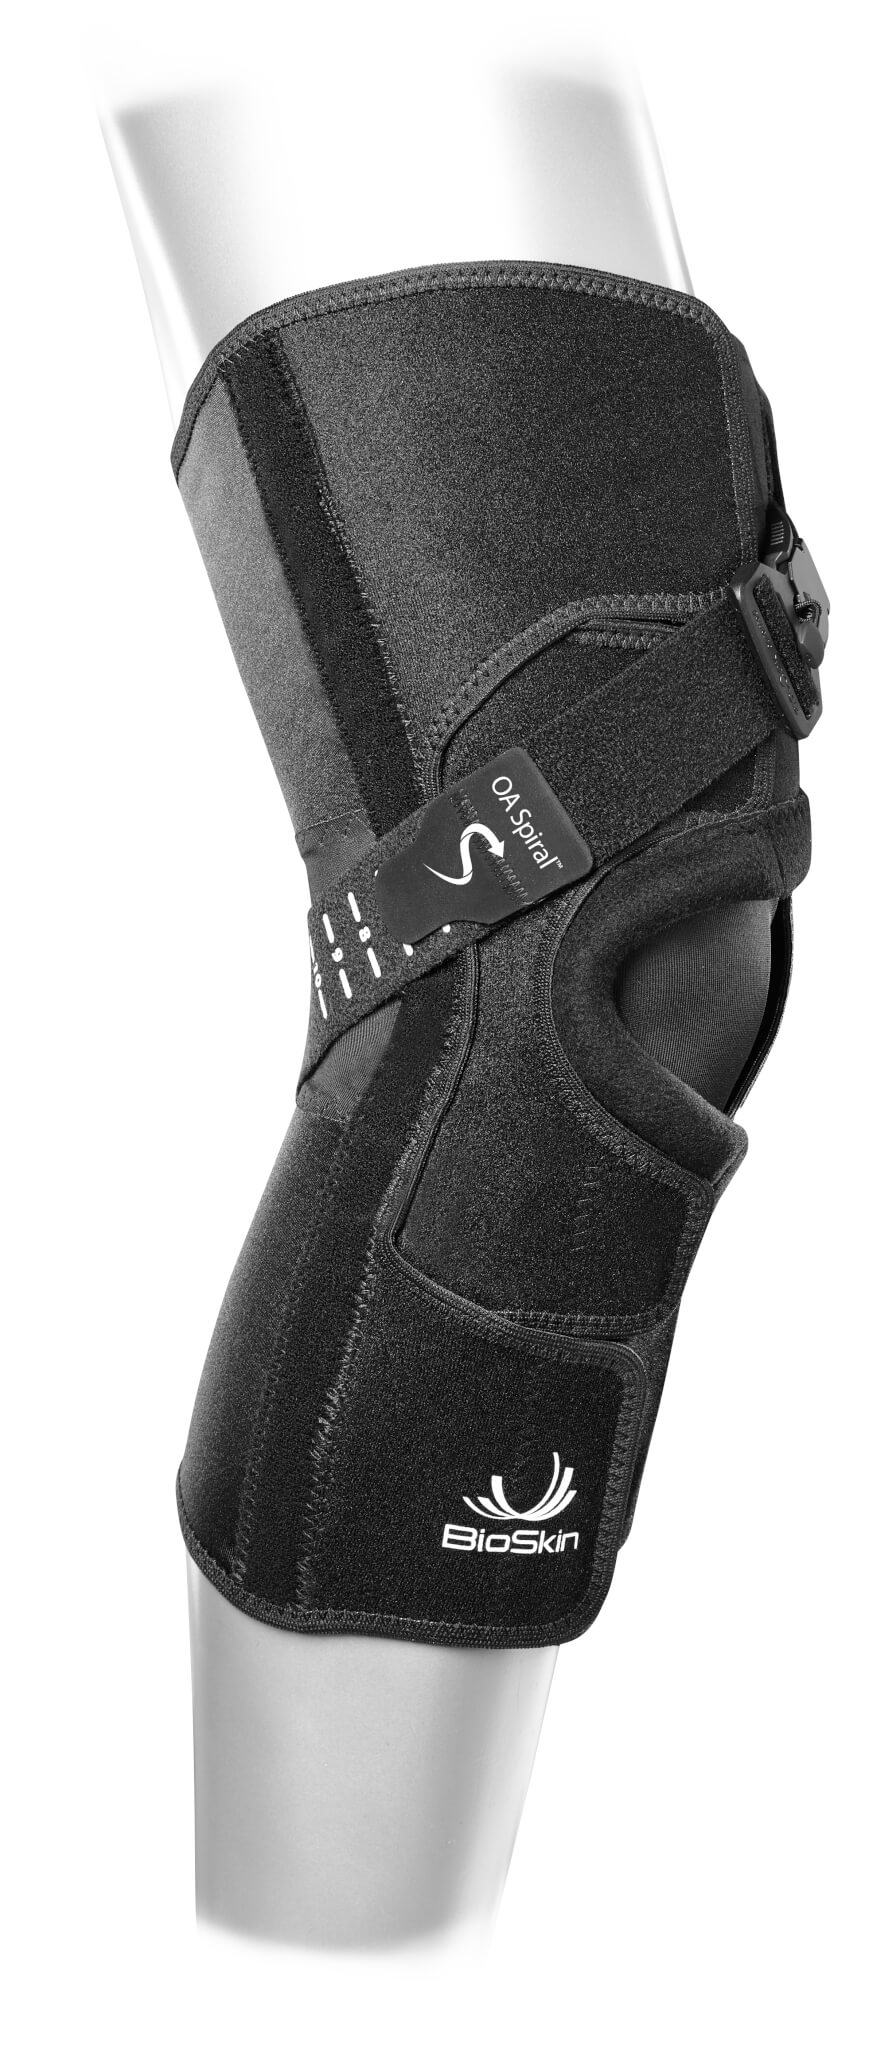 Unloading Knee Braces: 5 Questions & Answers